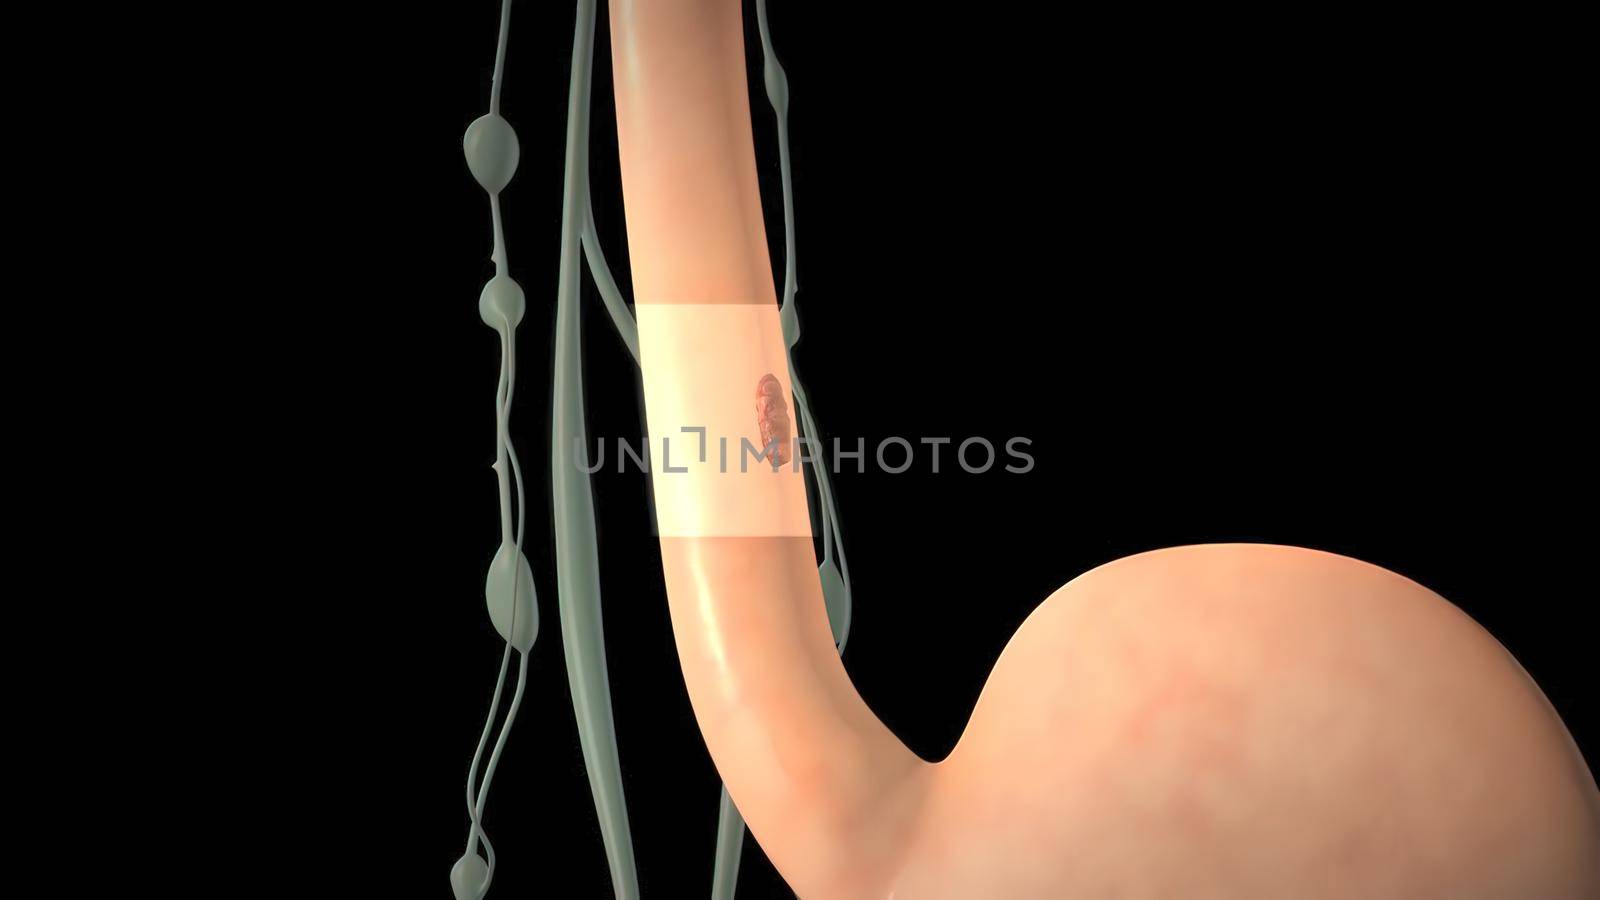 Squamous cell carcinoma - Esophagus tumor growing 3D illustration